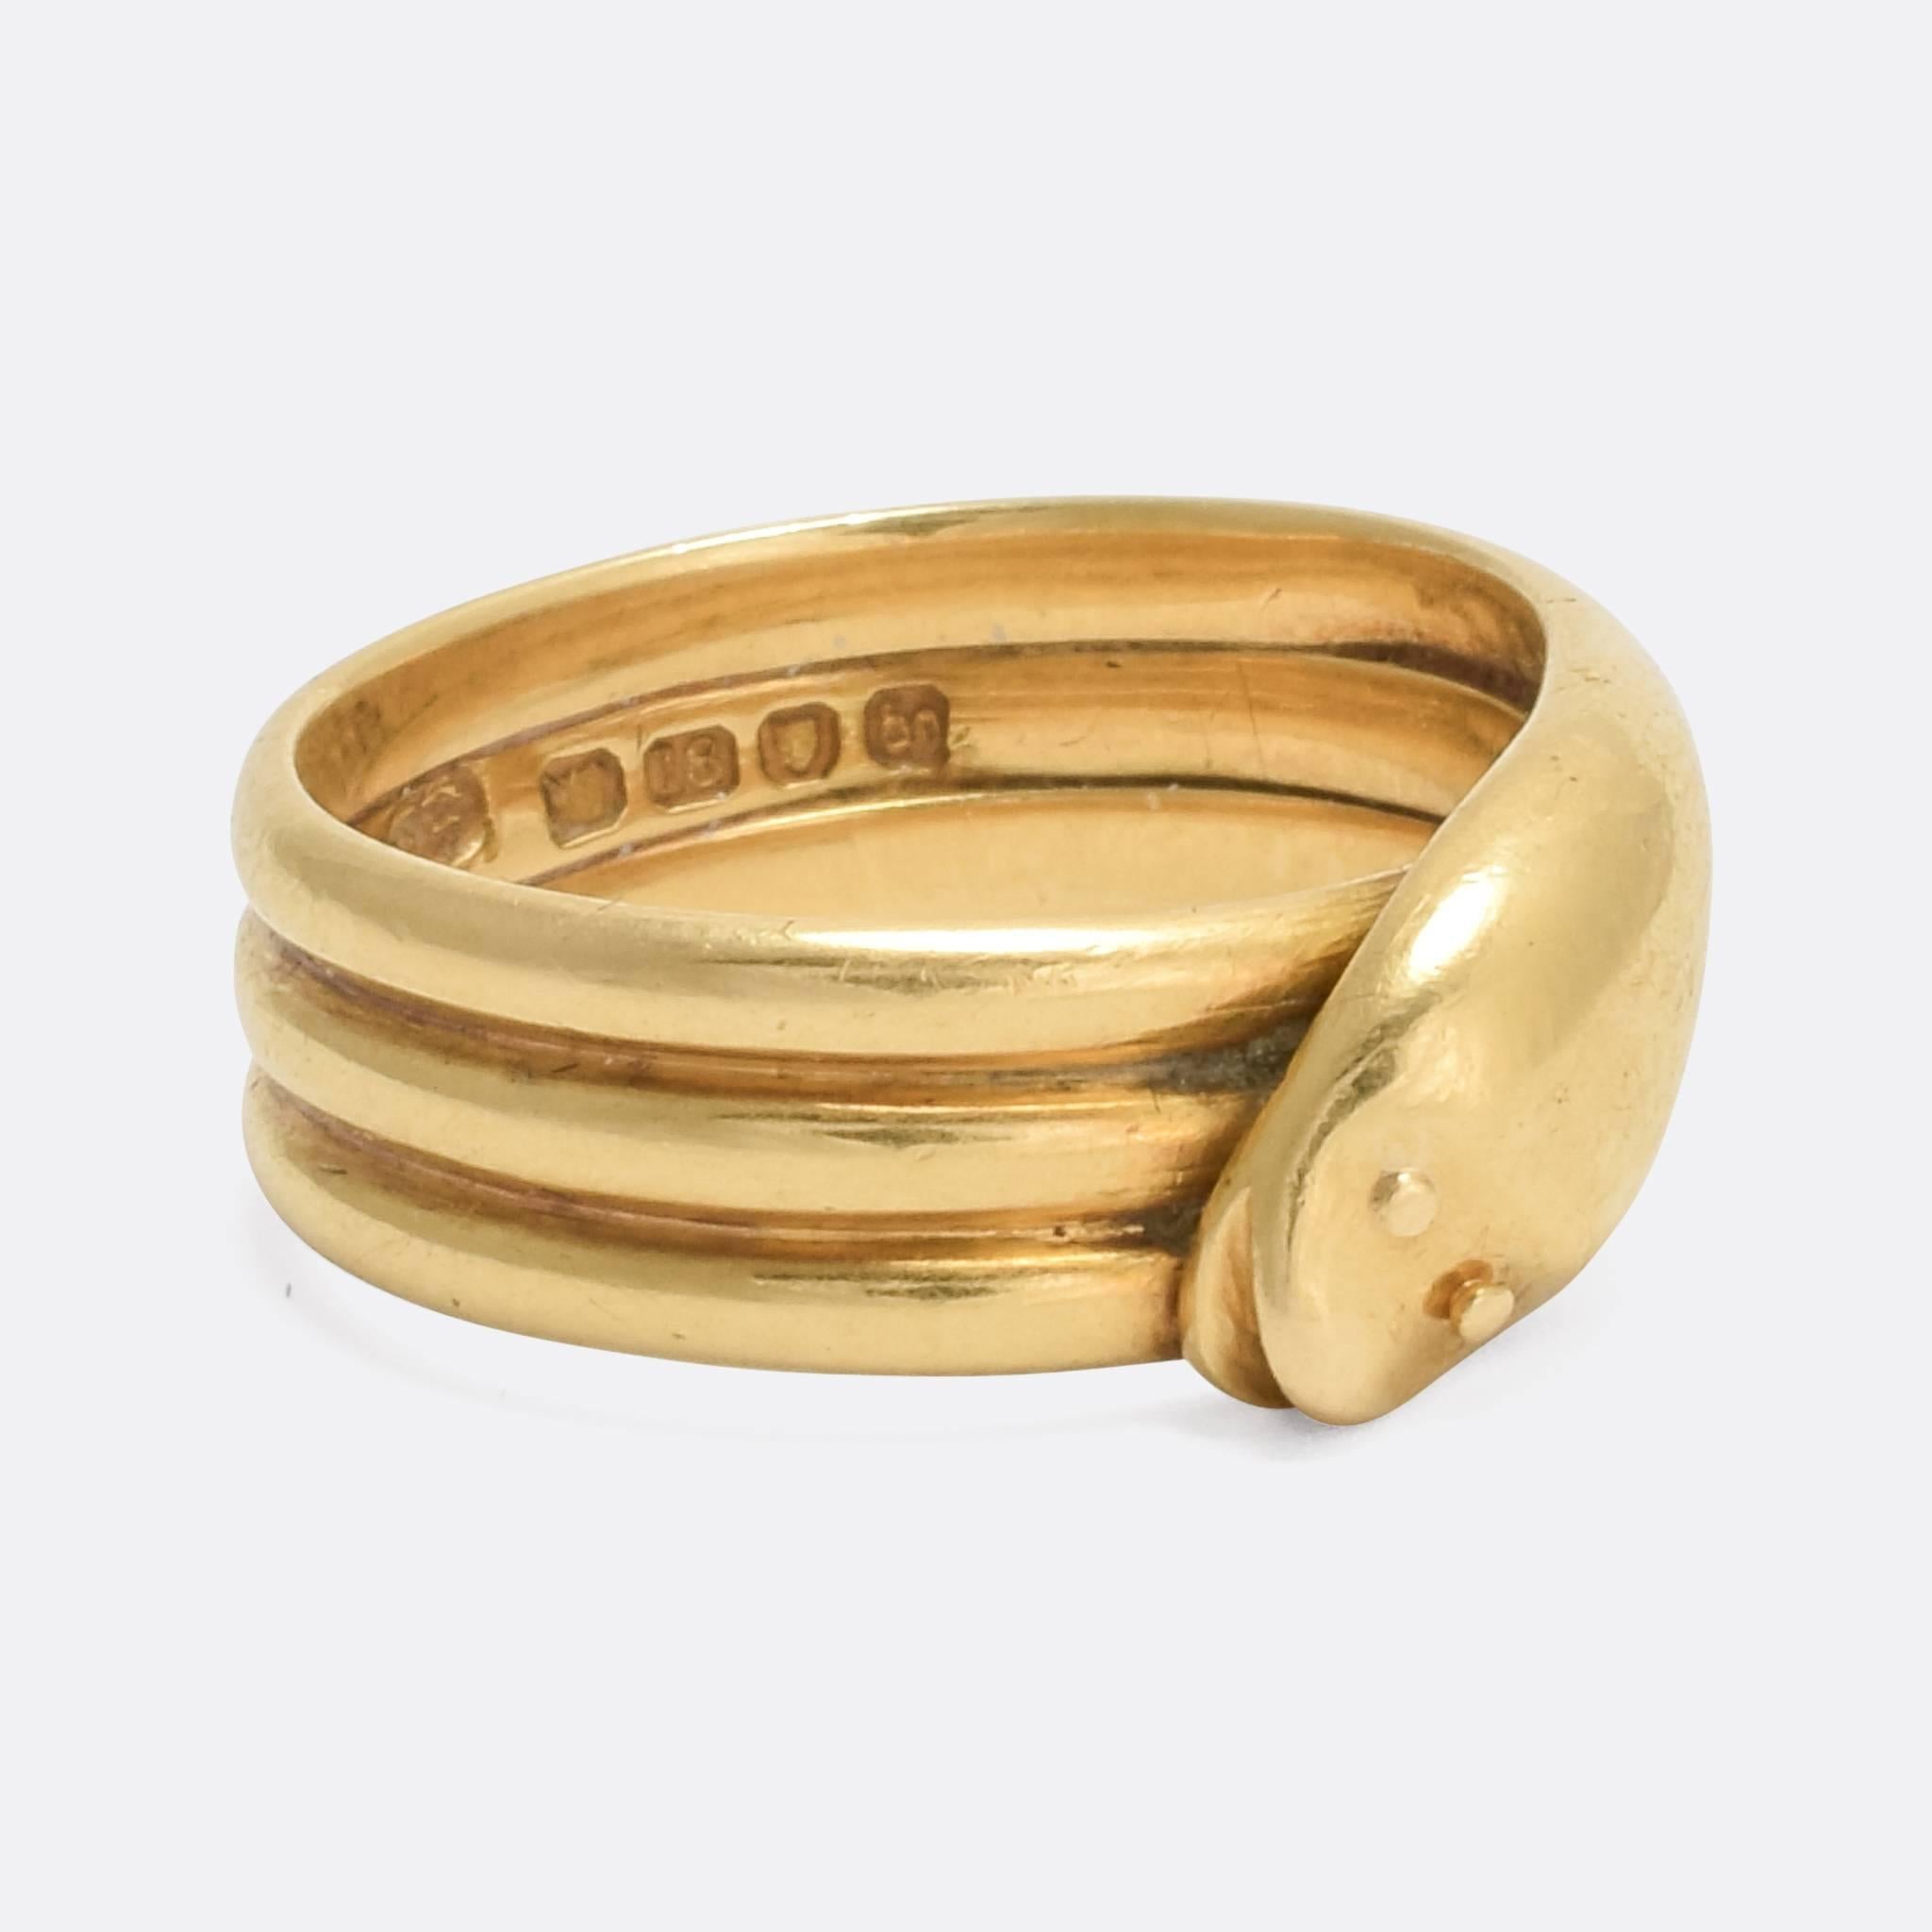 A super cute antique snake ring, modelled in rich 18 karat yellow gold. With London hallmarks for the year 1873, the snake has a goofy face, beady eyes, and relatively slim profile given it curves around the finger three times.

RING SIZE
6